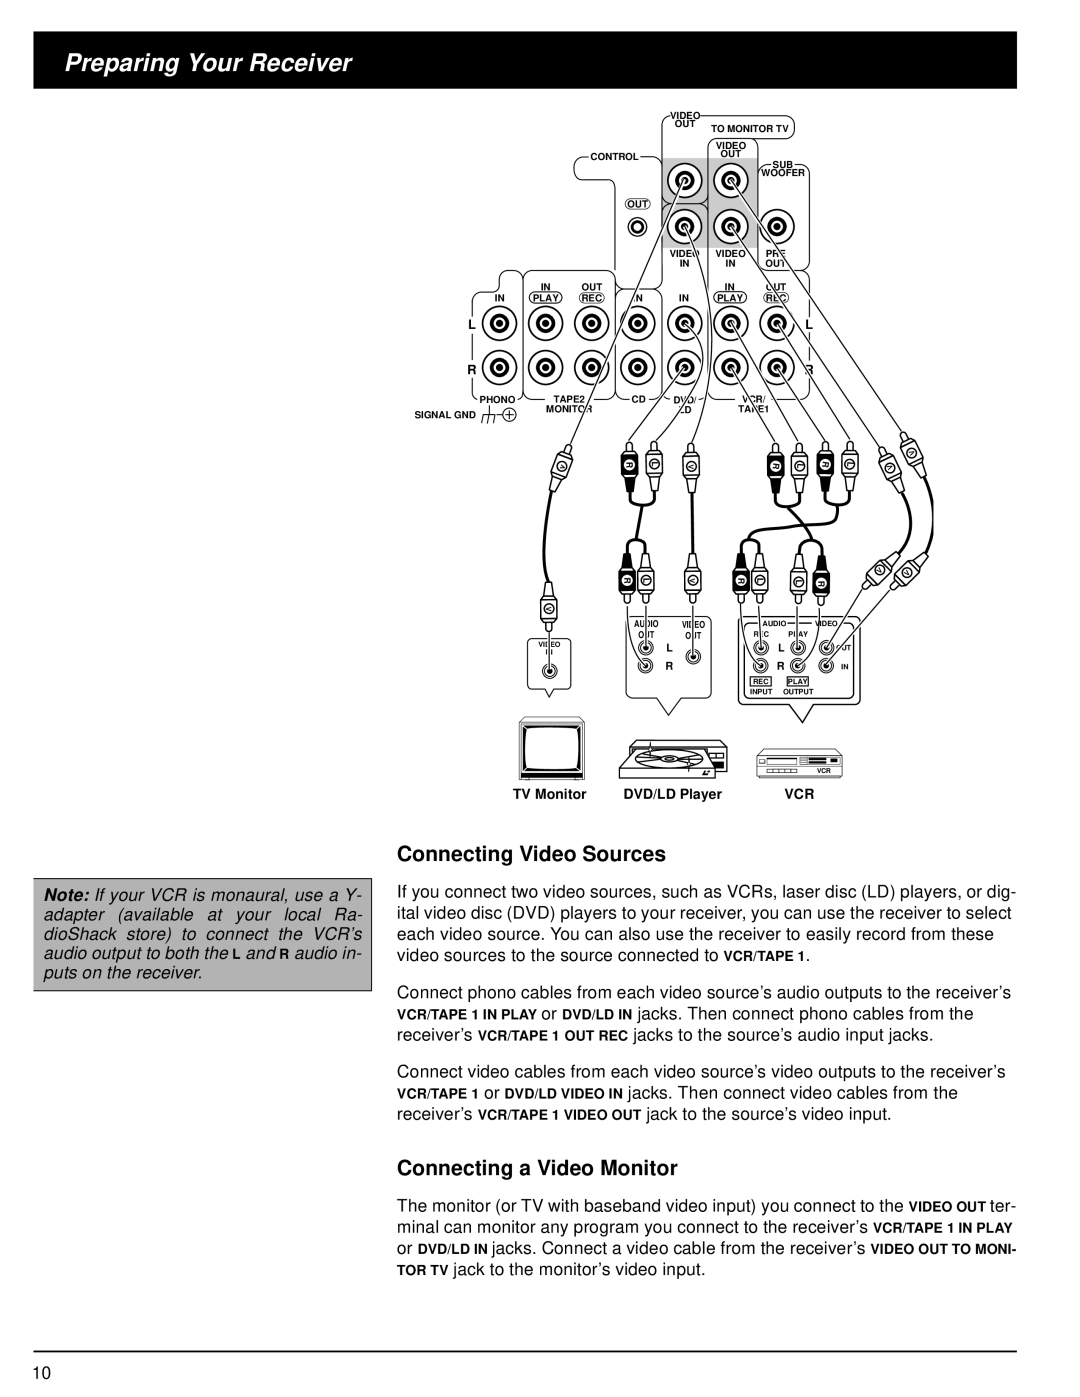 Panasonic STAV-3770 owner manual Connecting Video Sources, Connecting a Video Monitor, Preparing Your Receiver 